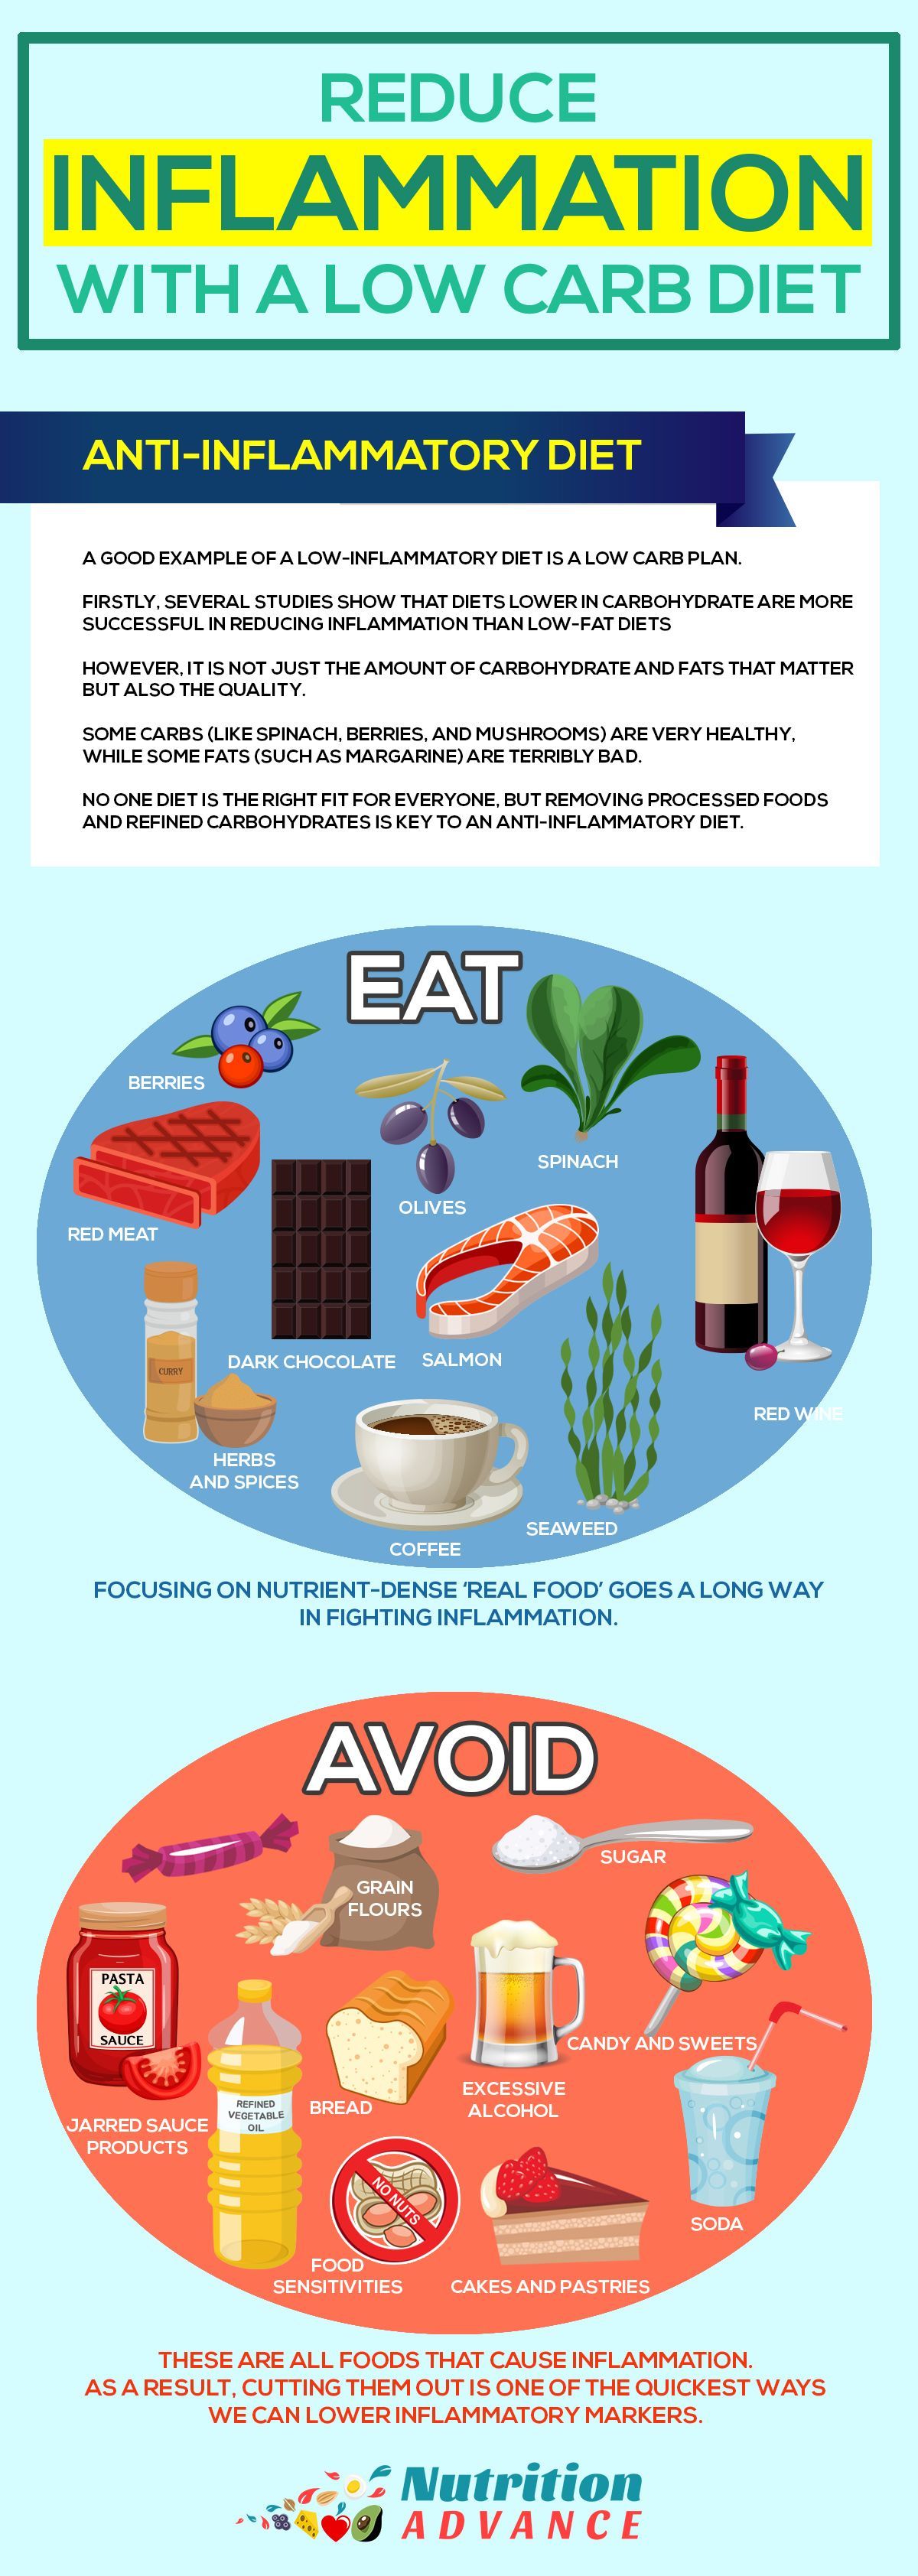 Reduce Inflammation With a Low Carb Diet and a Healthy and Active Lifestyle. This infographic shows some great anti-inflammatory